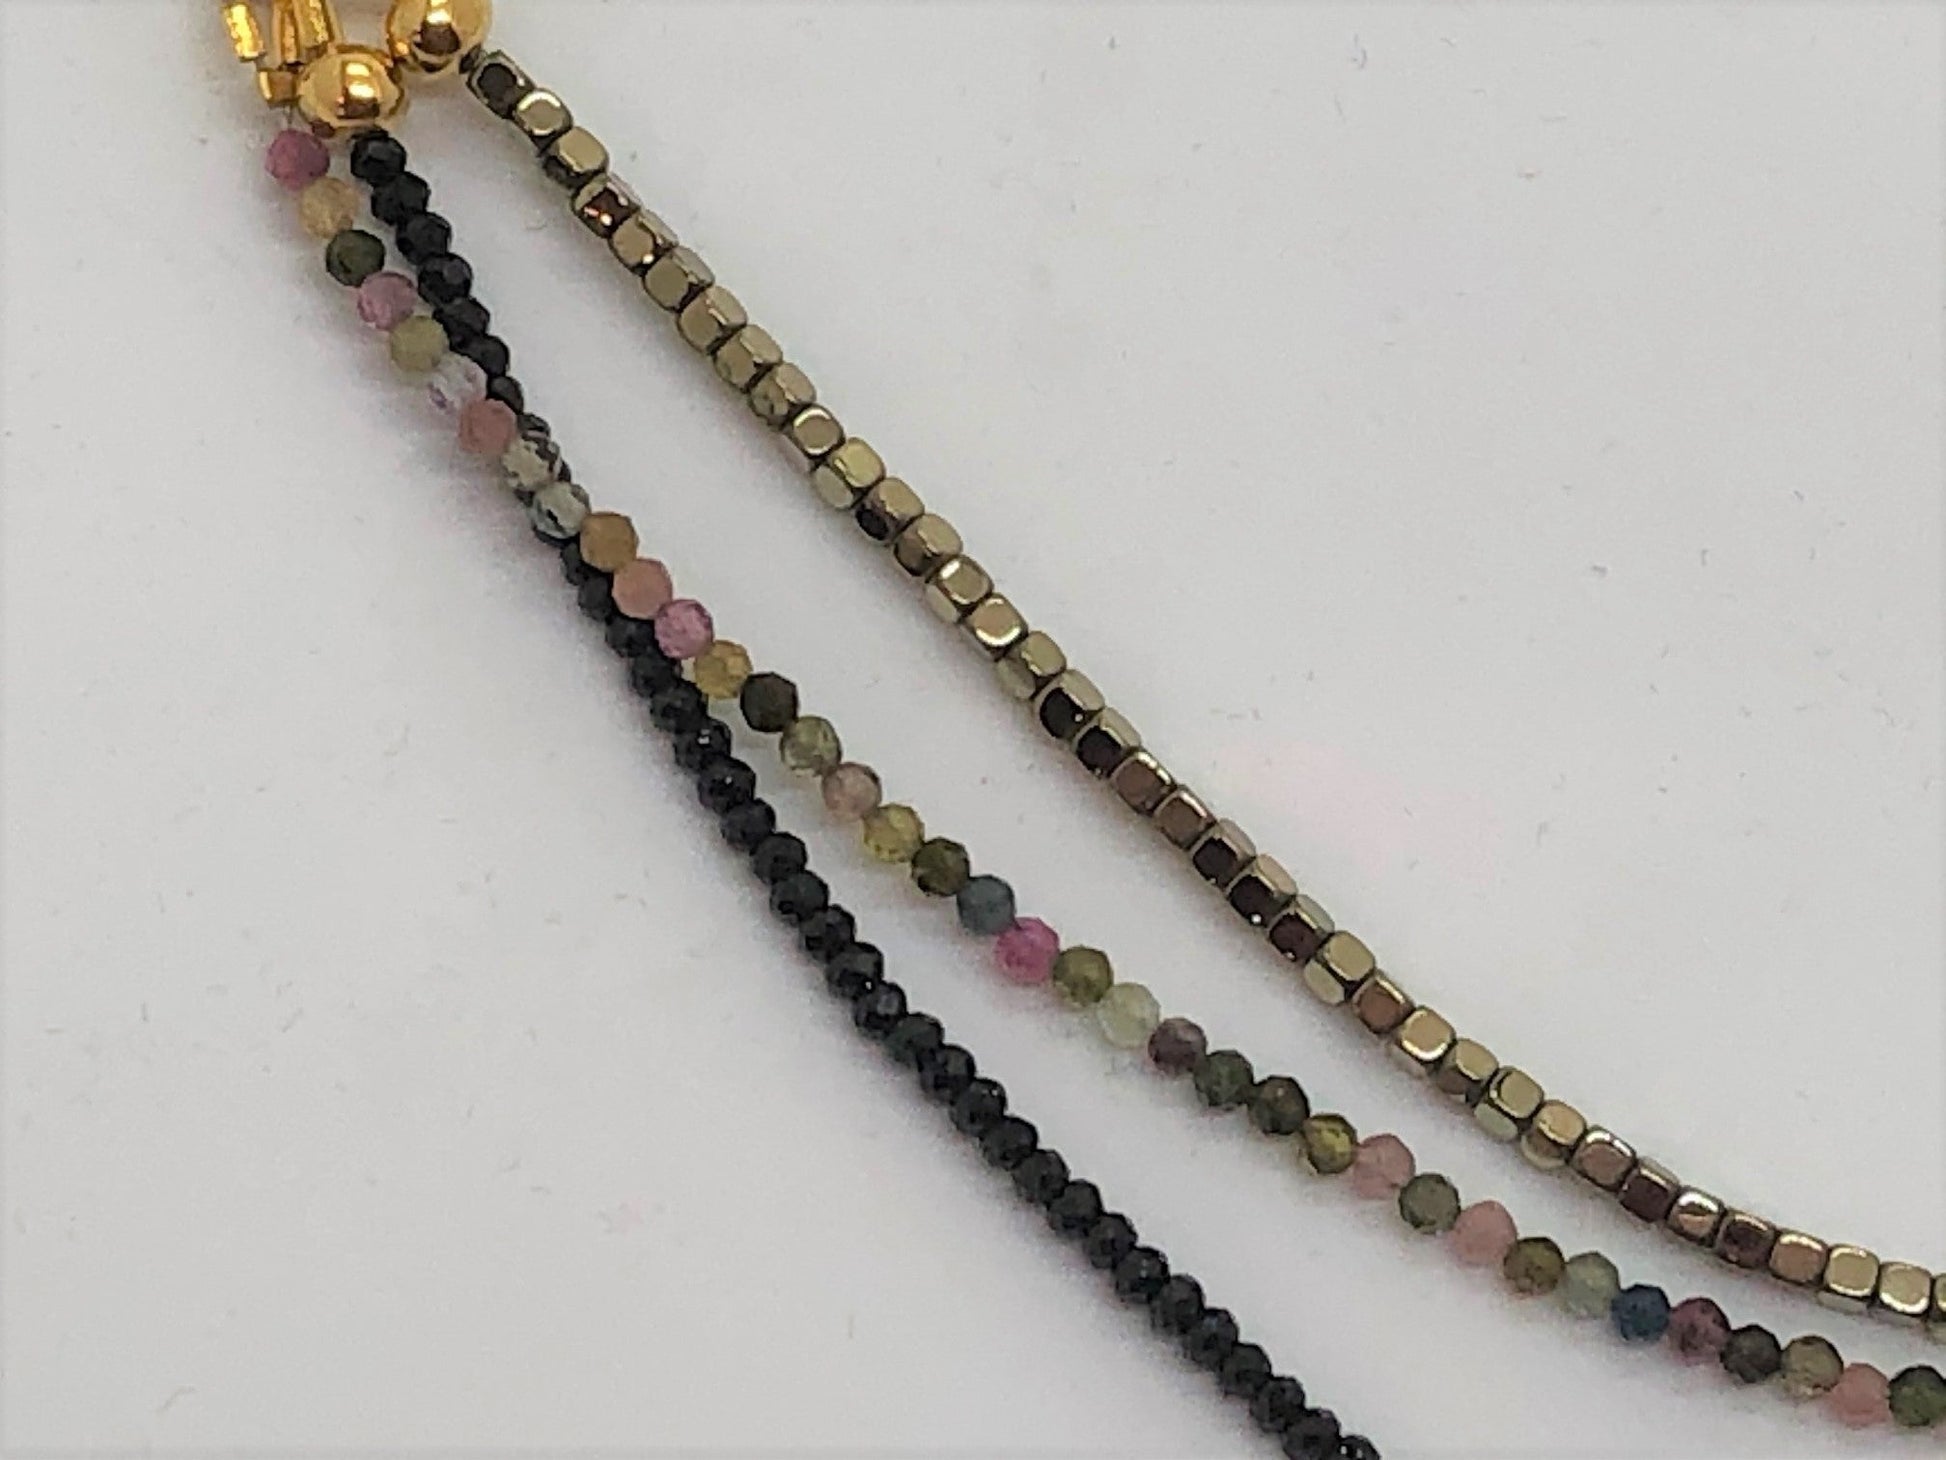 Triple Gemstone Short Necklace with Tourmaline and Gold Hematite - Emmis Jewelry, Necklace, [product_color]